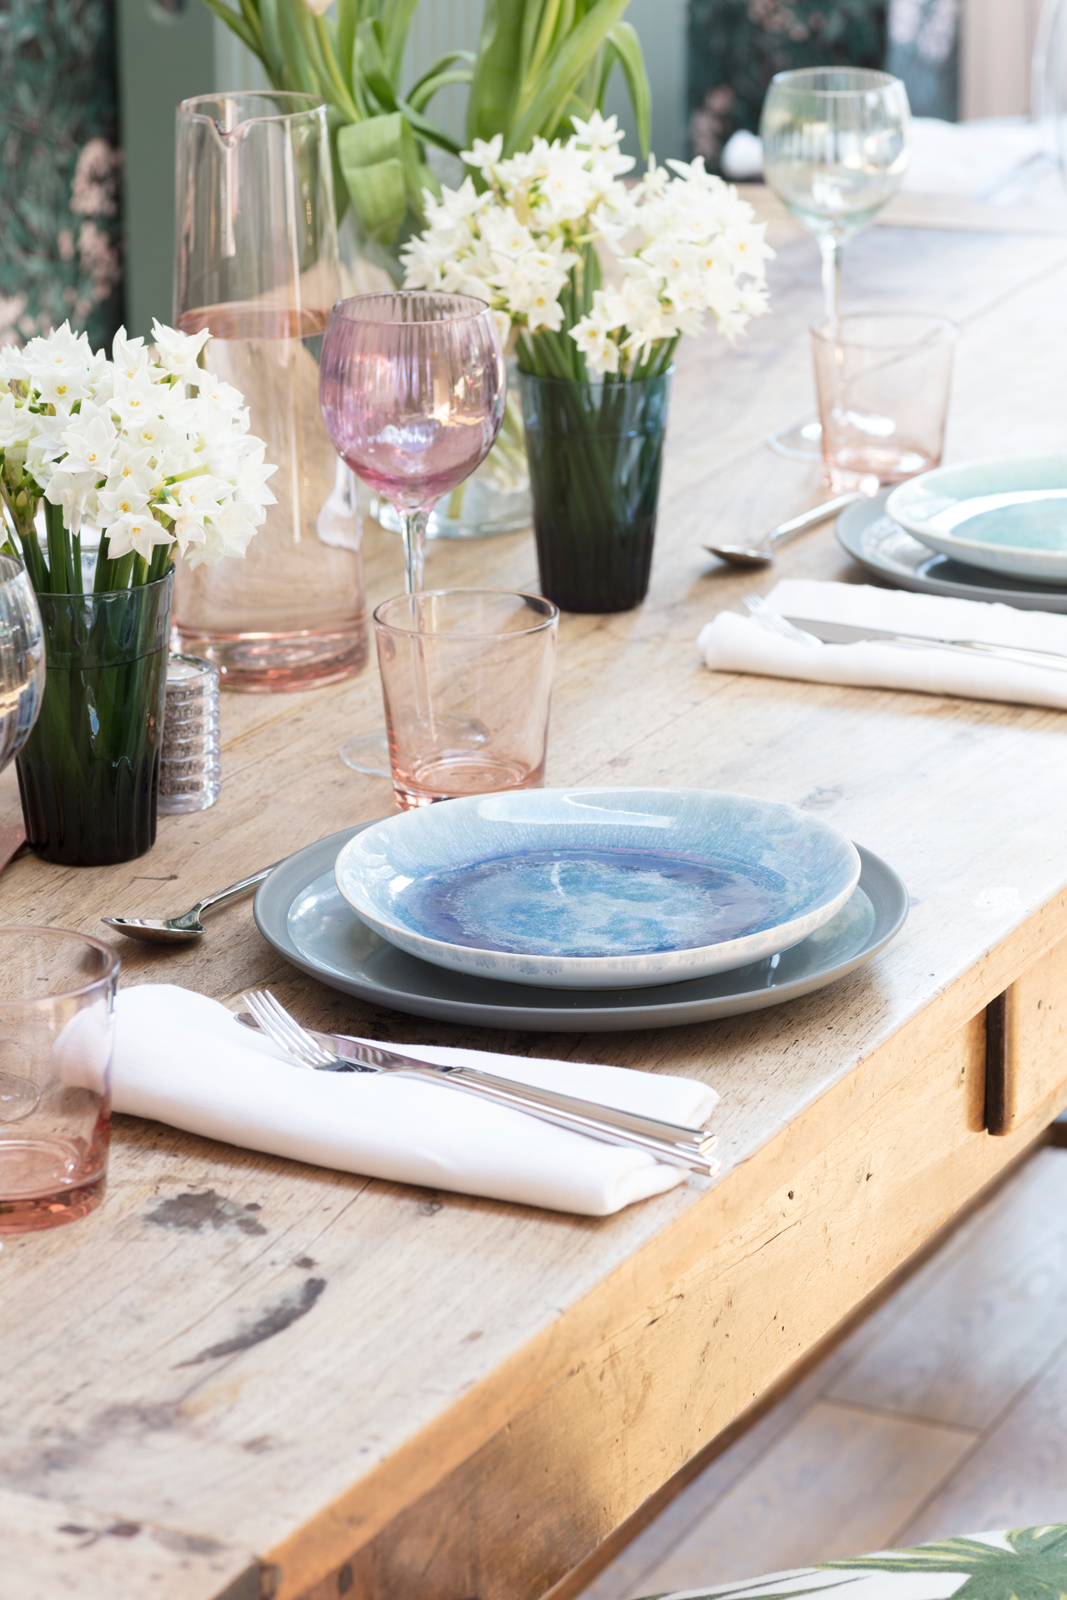 How to style a spring dining table